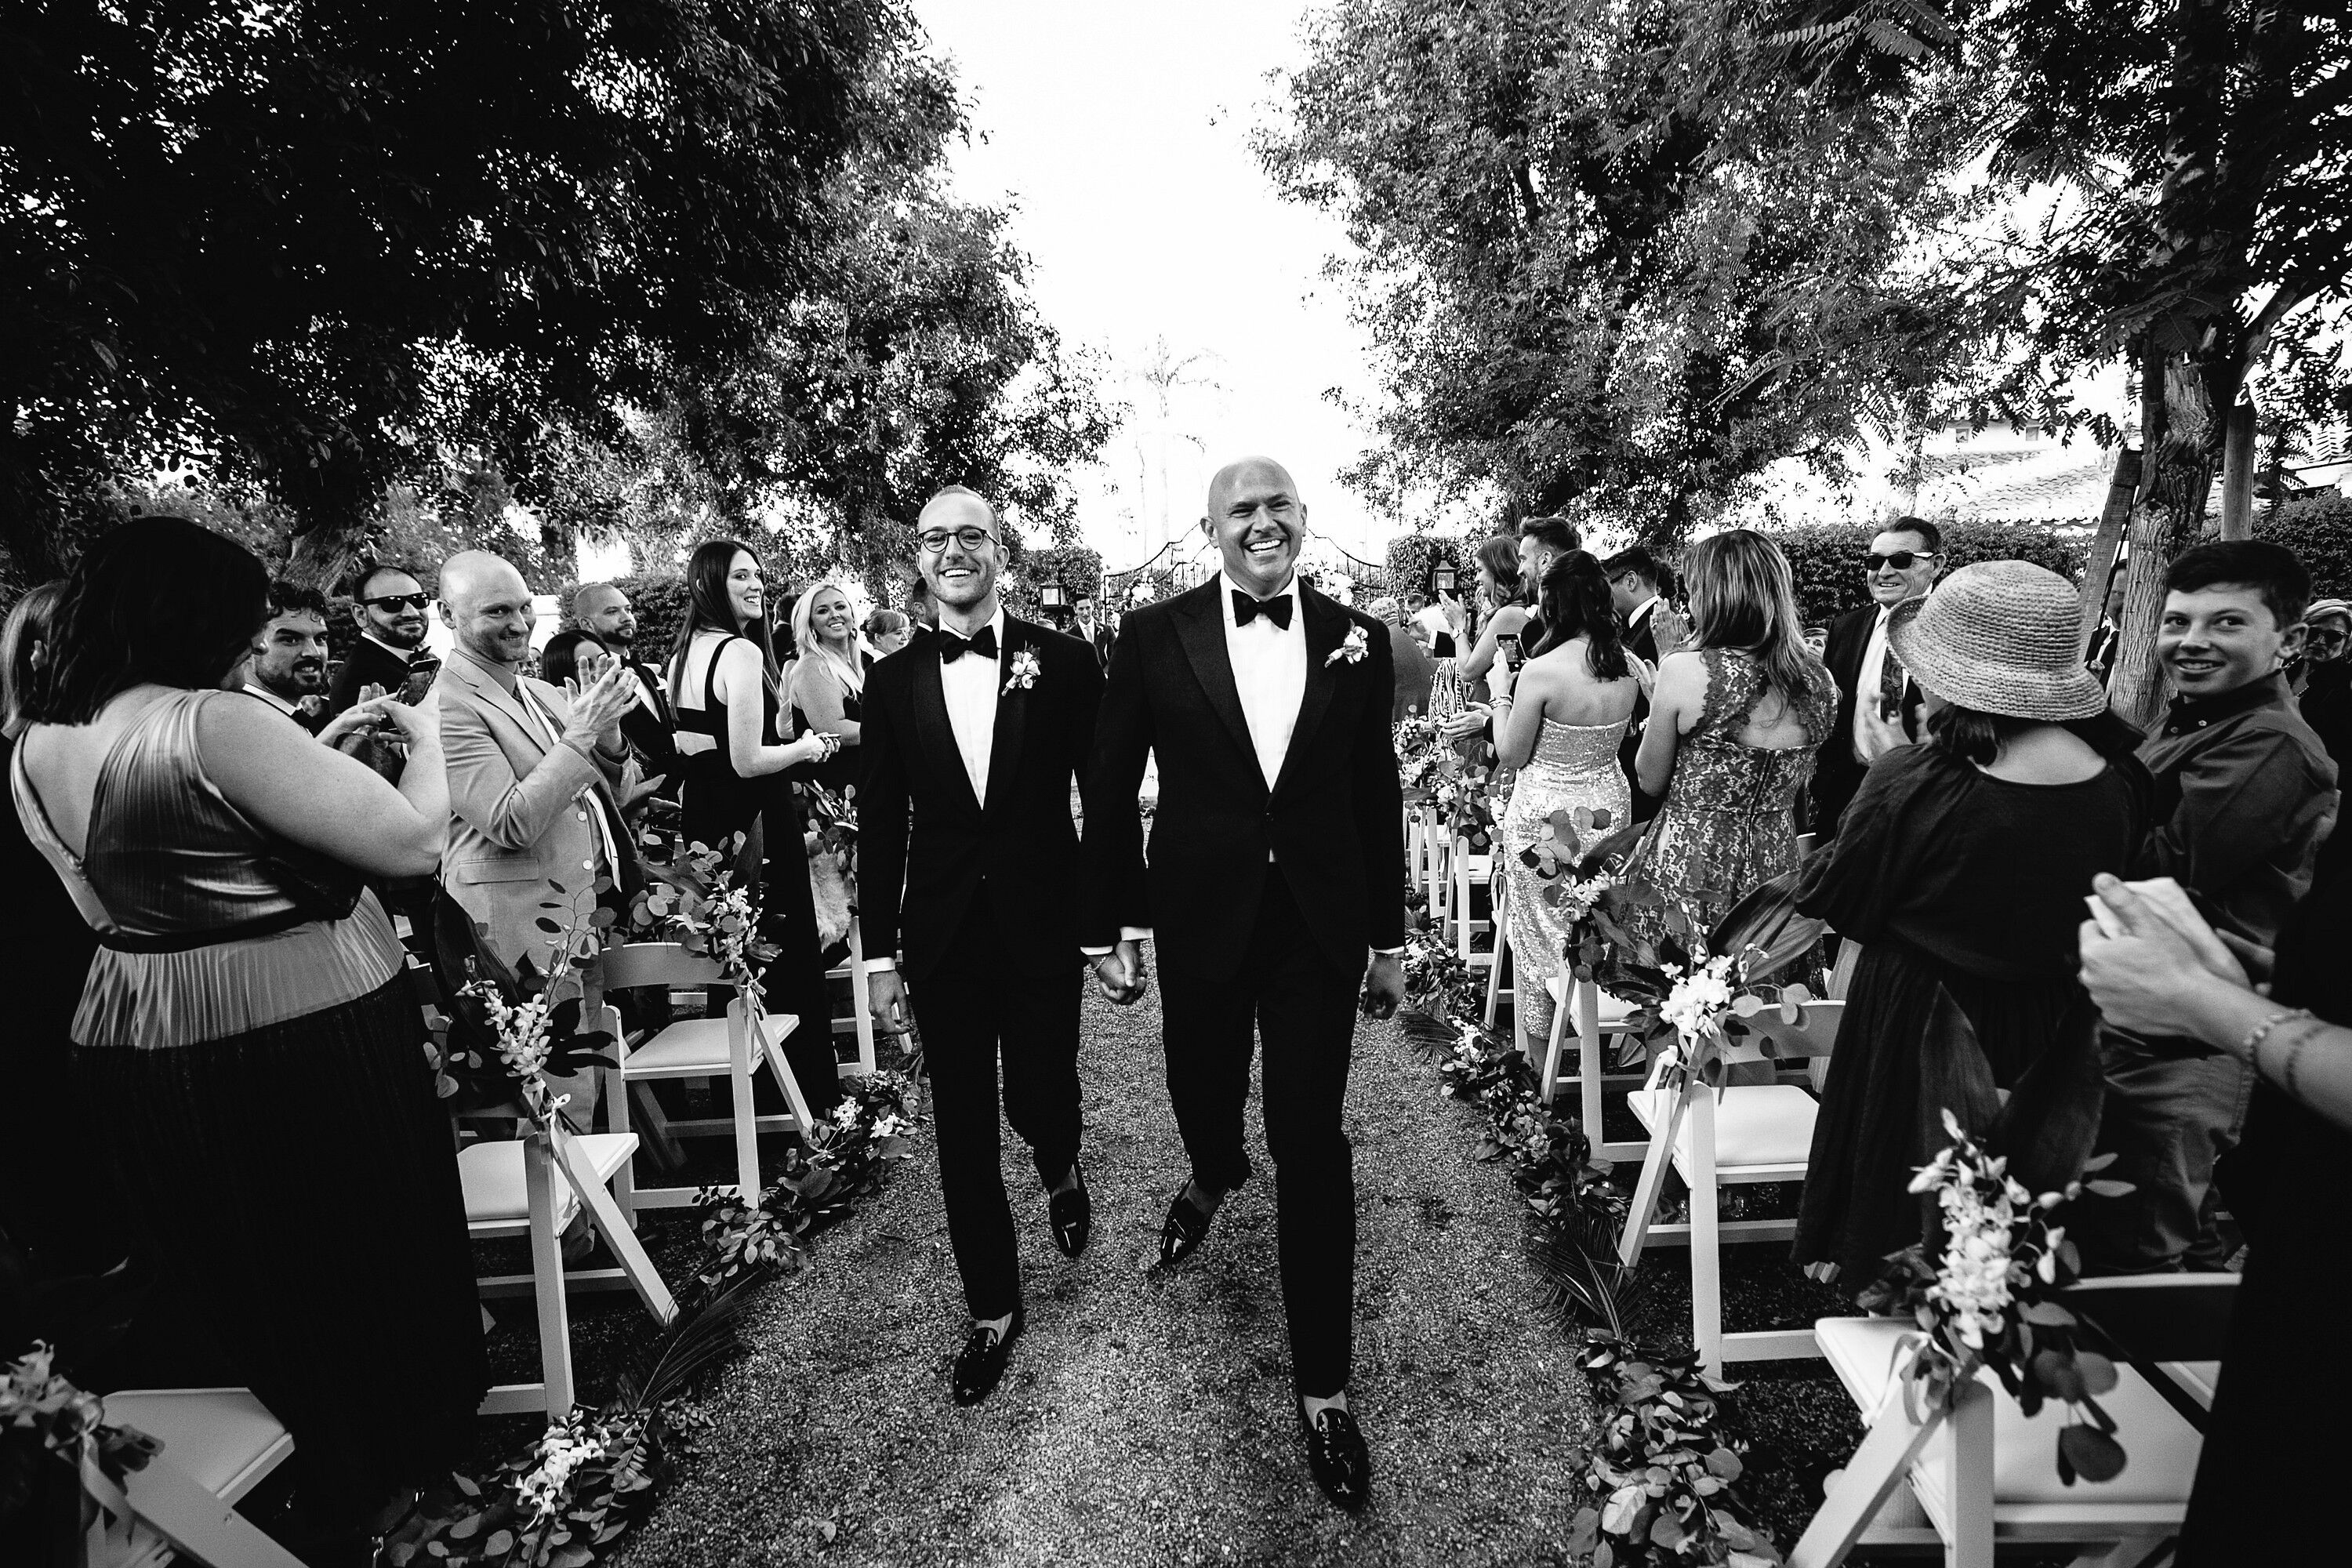 Classic Same-Sex Recessional with Couple in Black Tuxedos